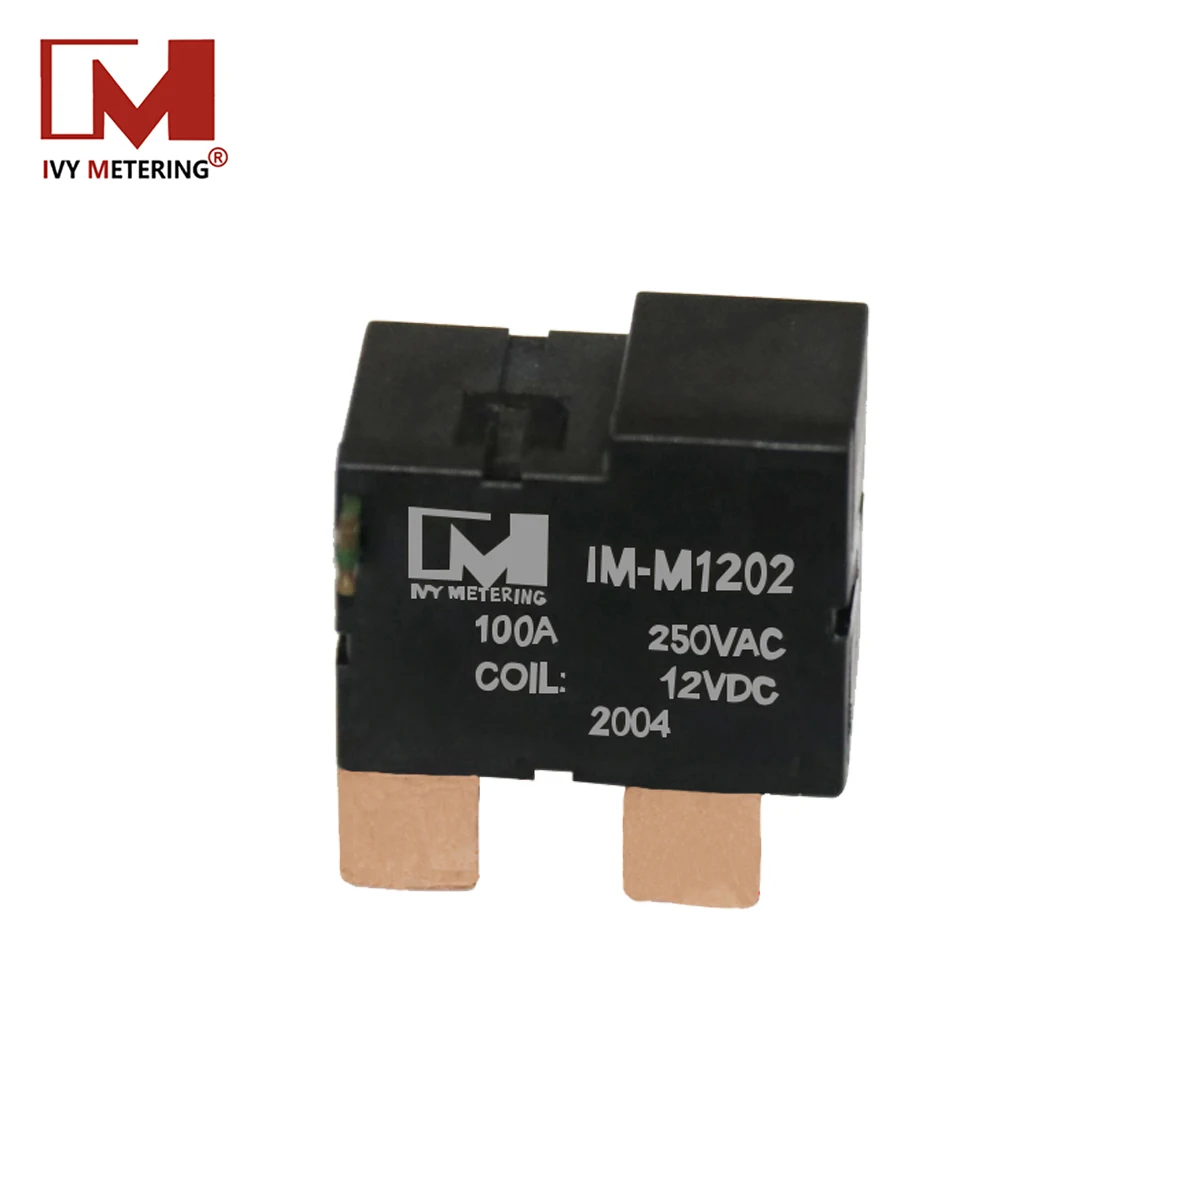 
IM-M1202 Mini High Power Electronic Latching Relay Motor Protection Relay with 100A 250VAC 